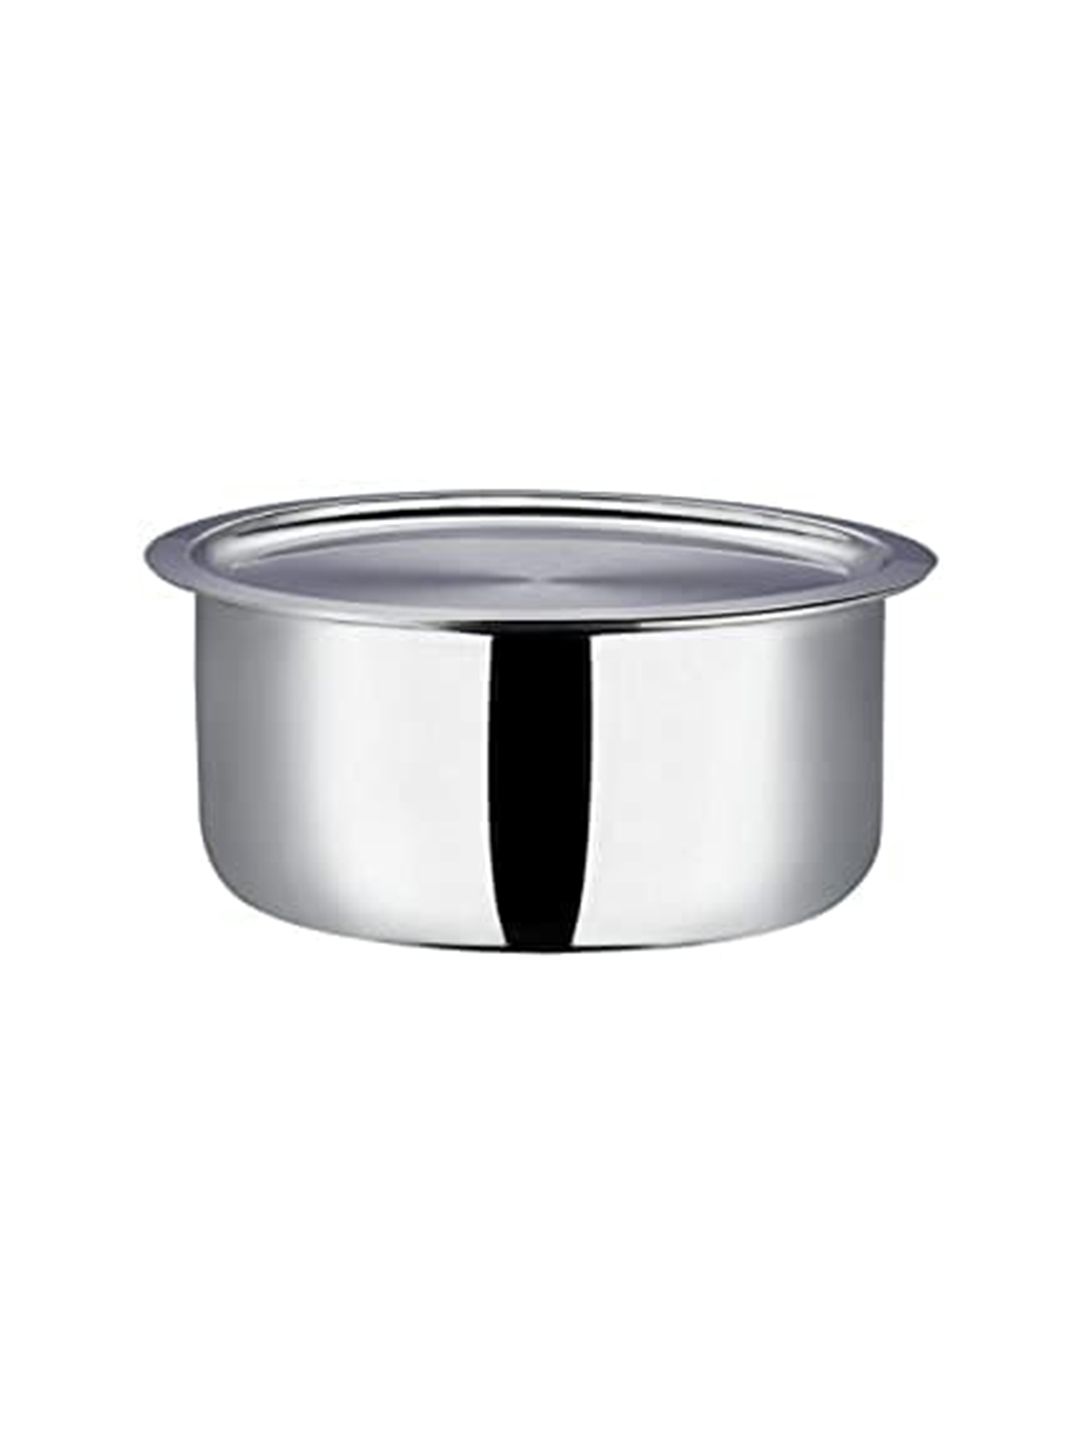 Vinod Silver-Toned Solid Tope With Lid  5.8 Ltr Price in India